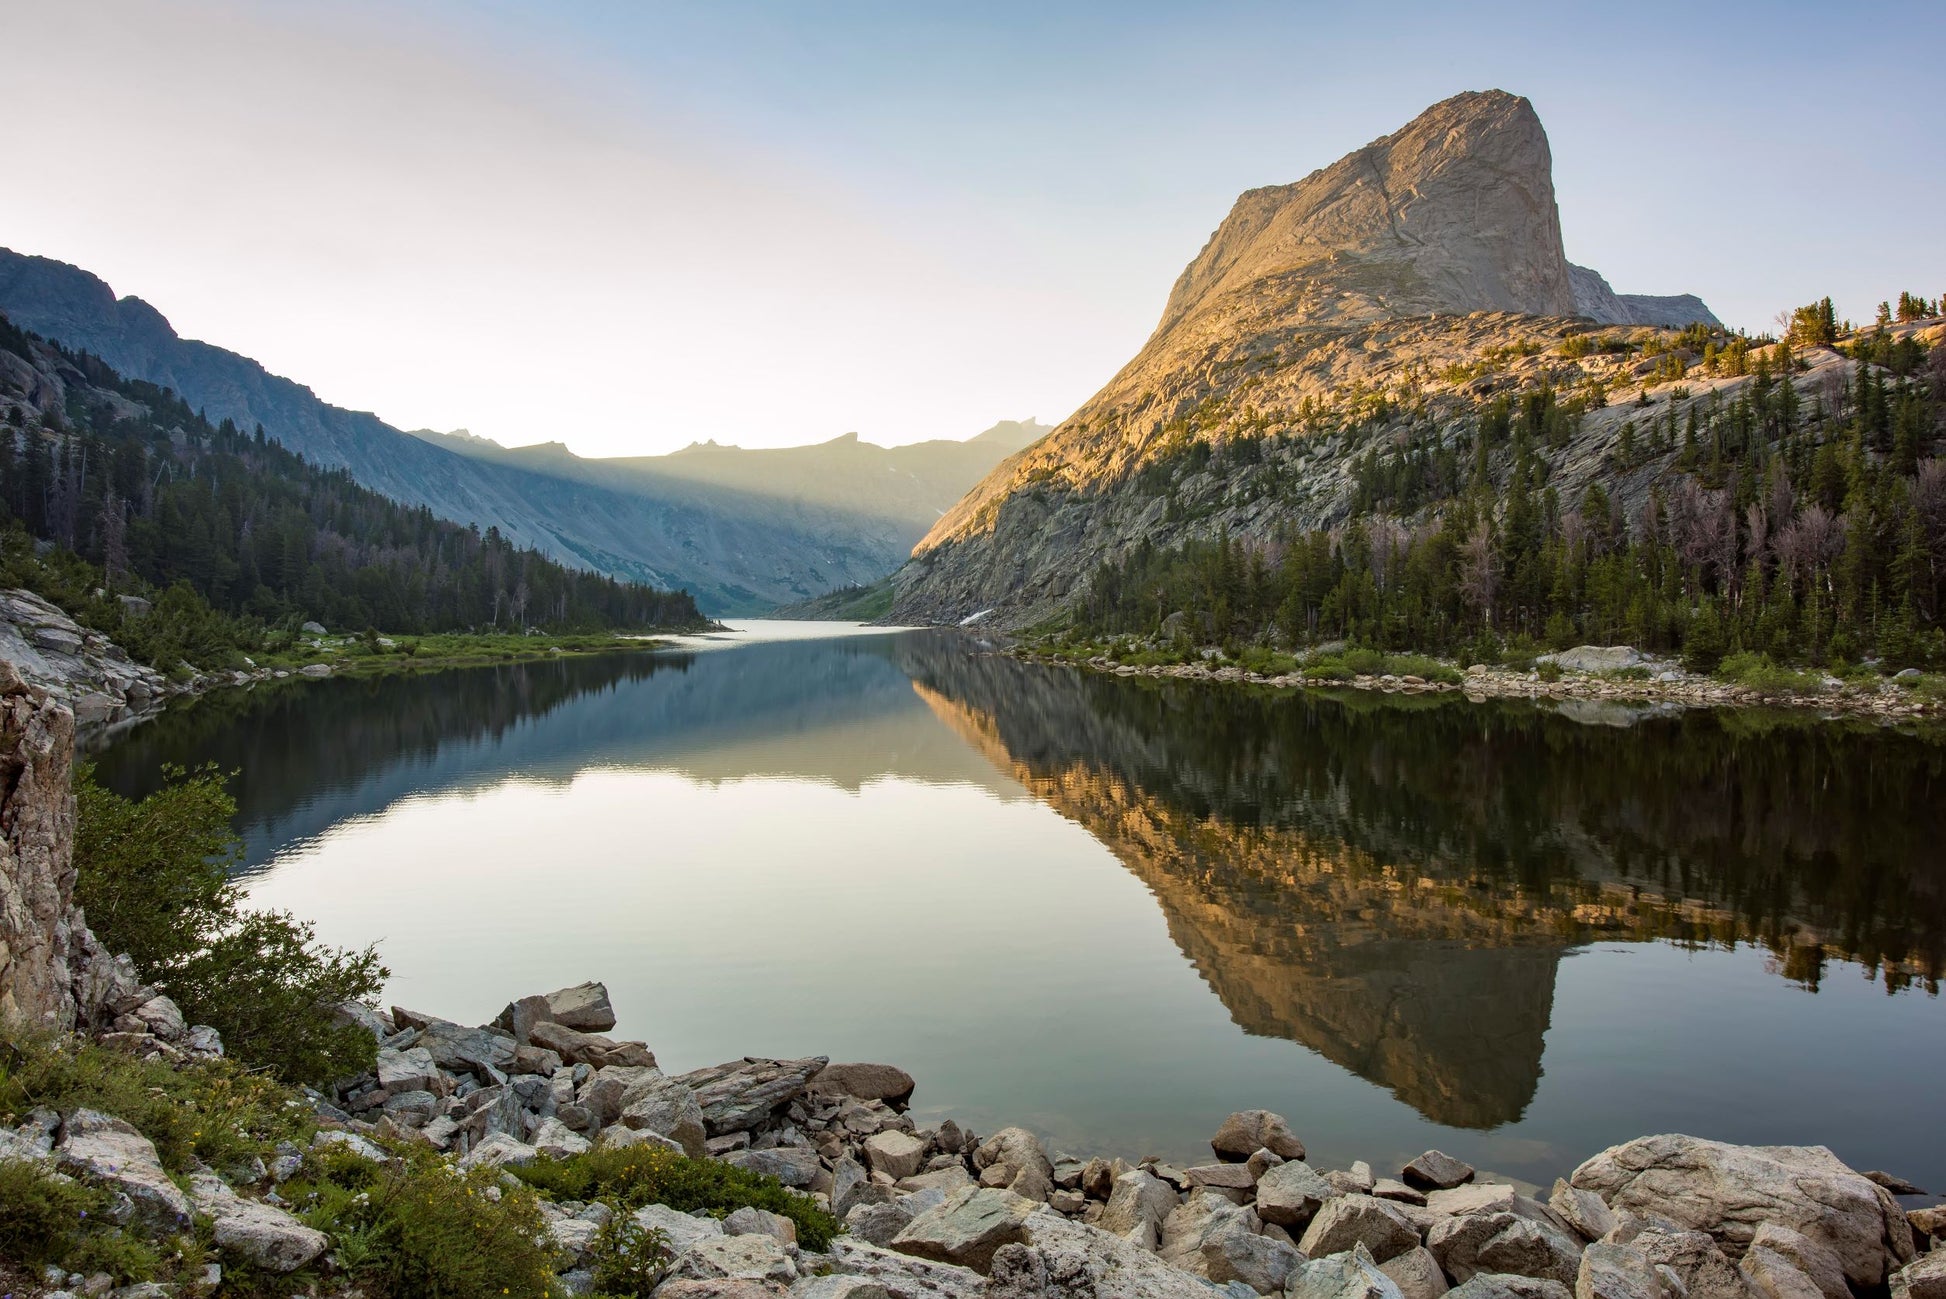 " Black Joe Lake " Photographer: Kyle Spradley 8 " x 10" Lustre Print  Horizontal print  Alpenglow during a morning at Black Joe lake  Calm waters  Back country camping destination, high in the Wind River Mountains  Wyoming  Reflections in the lake  A protective sleeve is provided along with black mat for stability  Ready for a frame of  your choice